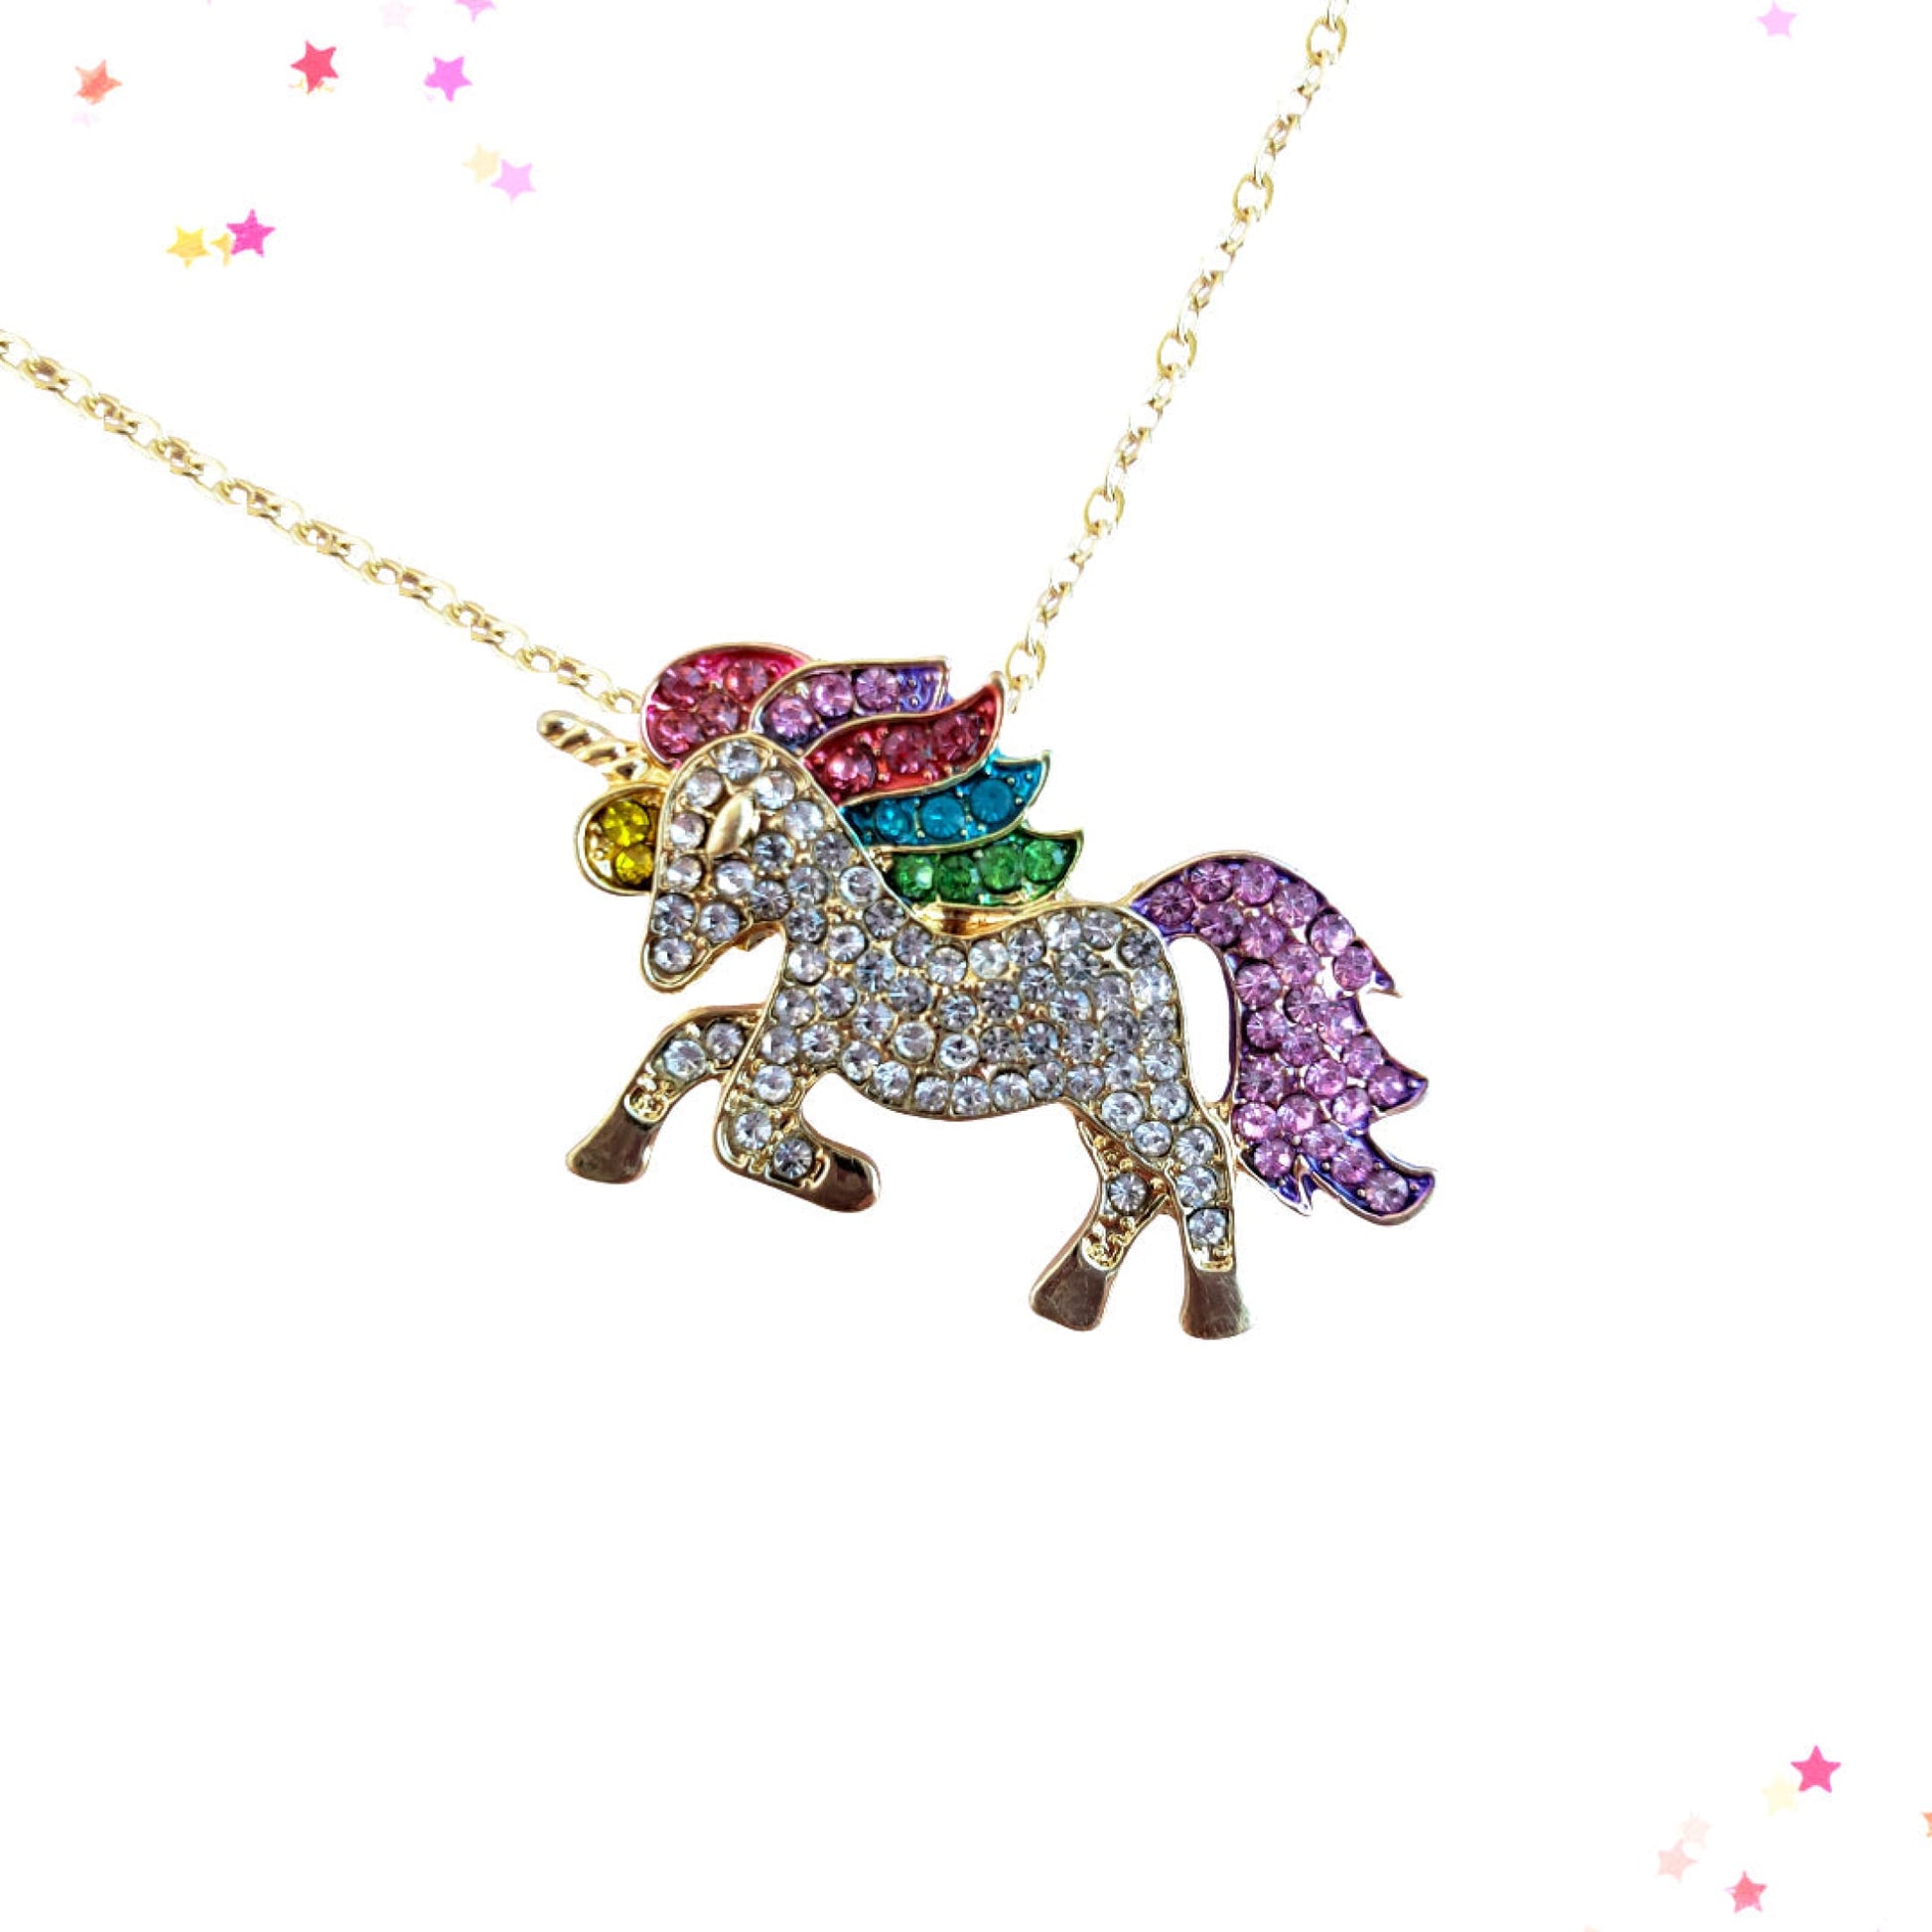 Rhinestone Unicorn Necklace from Confetti Kitty, Only 14.99